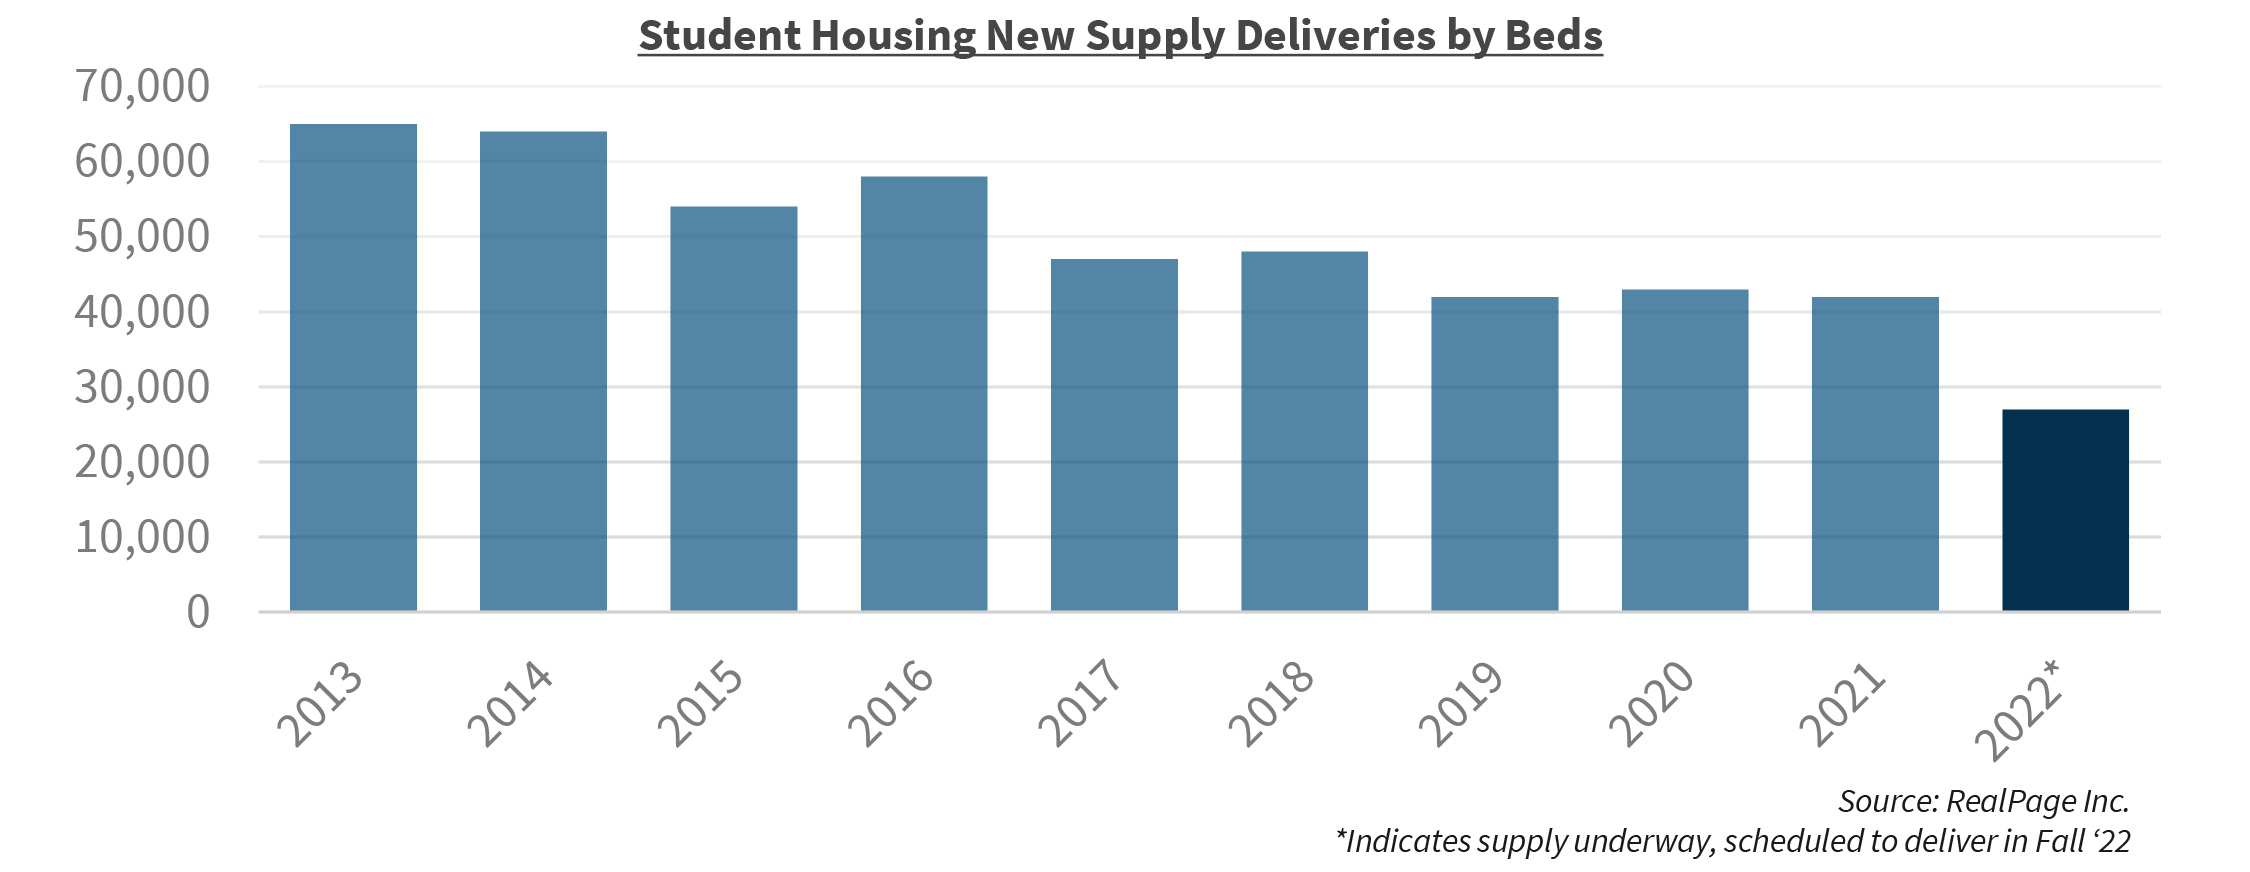 Student Housing New Supply Deliveries by Beds